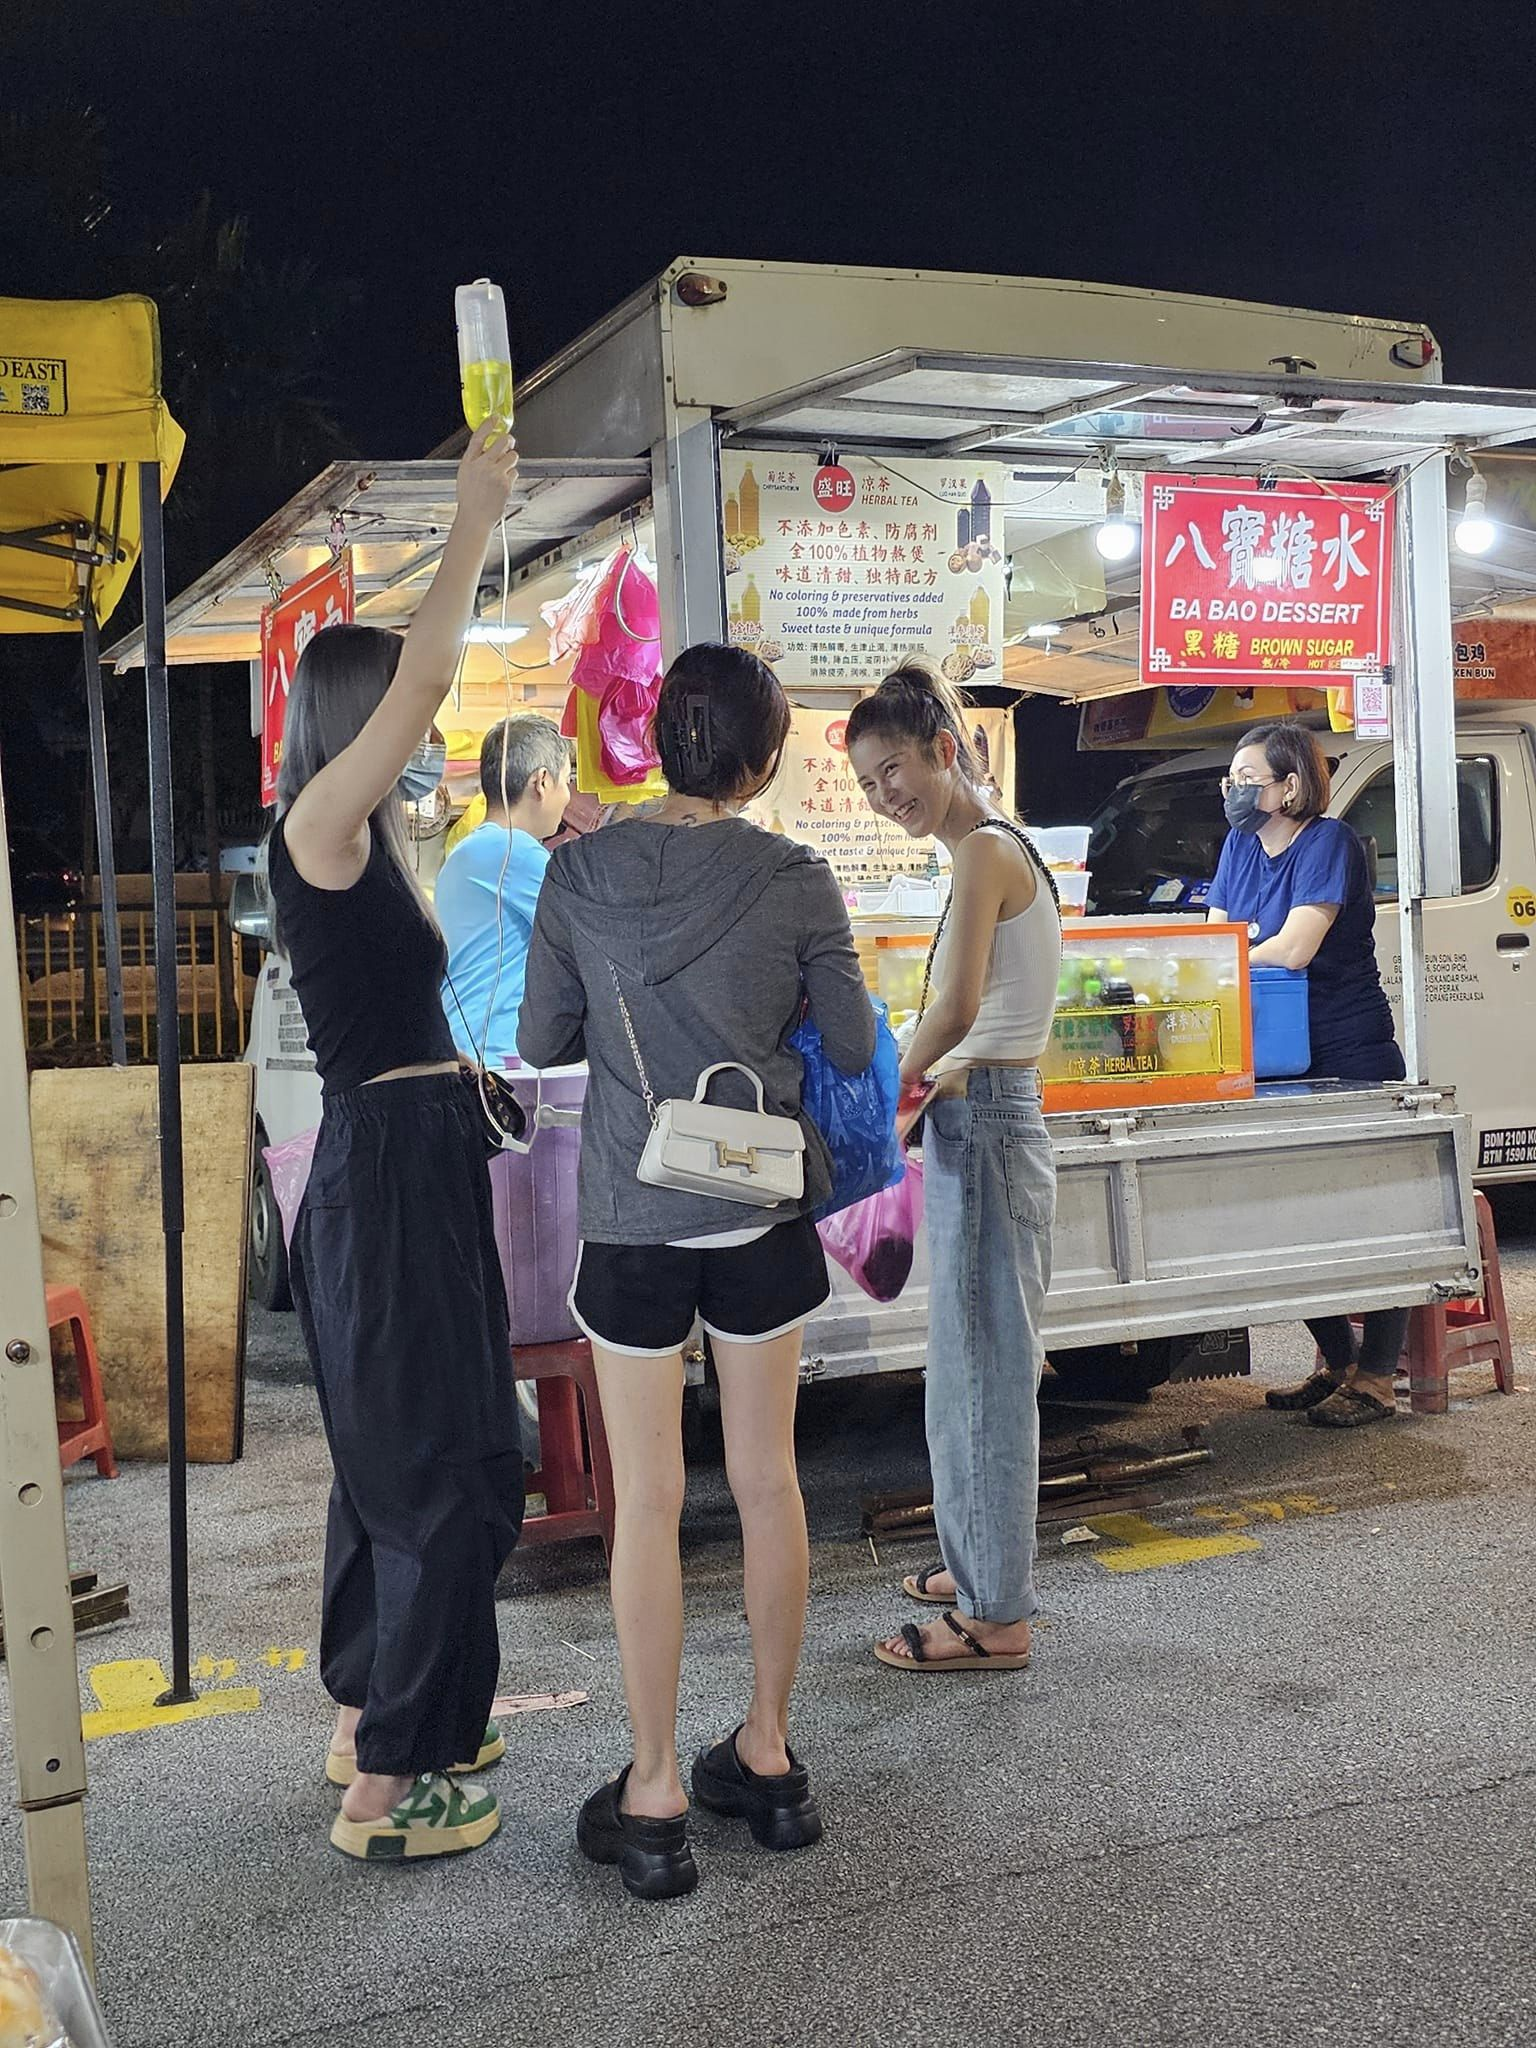 Woman visits dessert stall at taman connaught night market along with iv drip